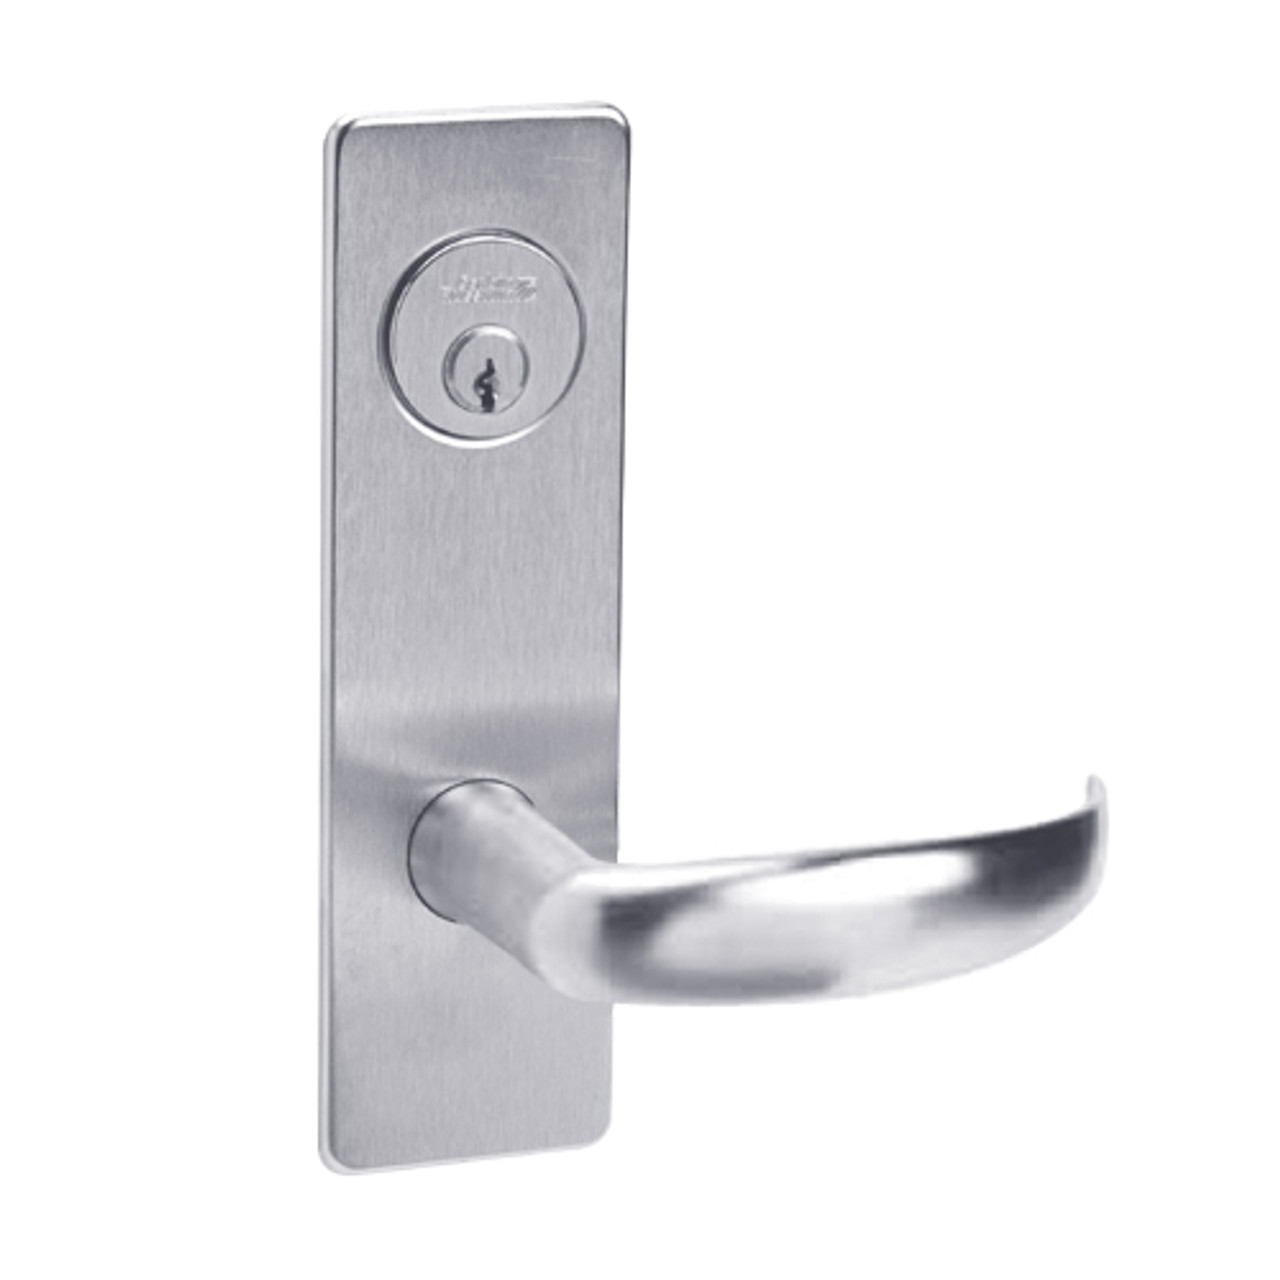 ML2069-PSR-625 Corbin Russwin ML2000 Series Mortise Institution Privacy Locksets with Princeton Lever in Bright Chrome